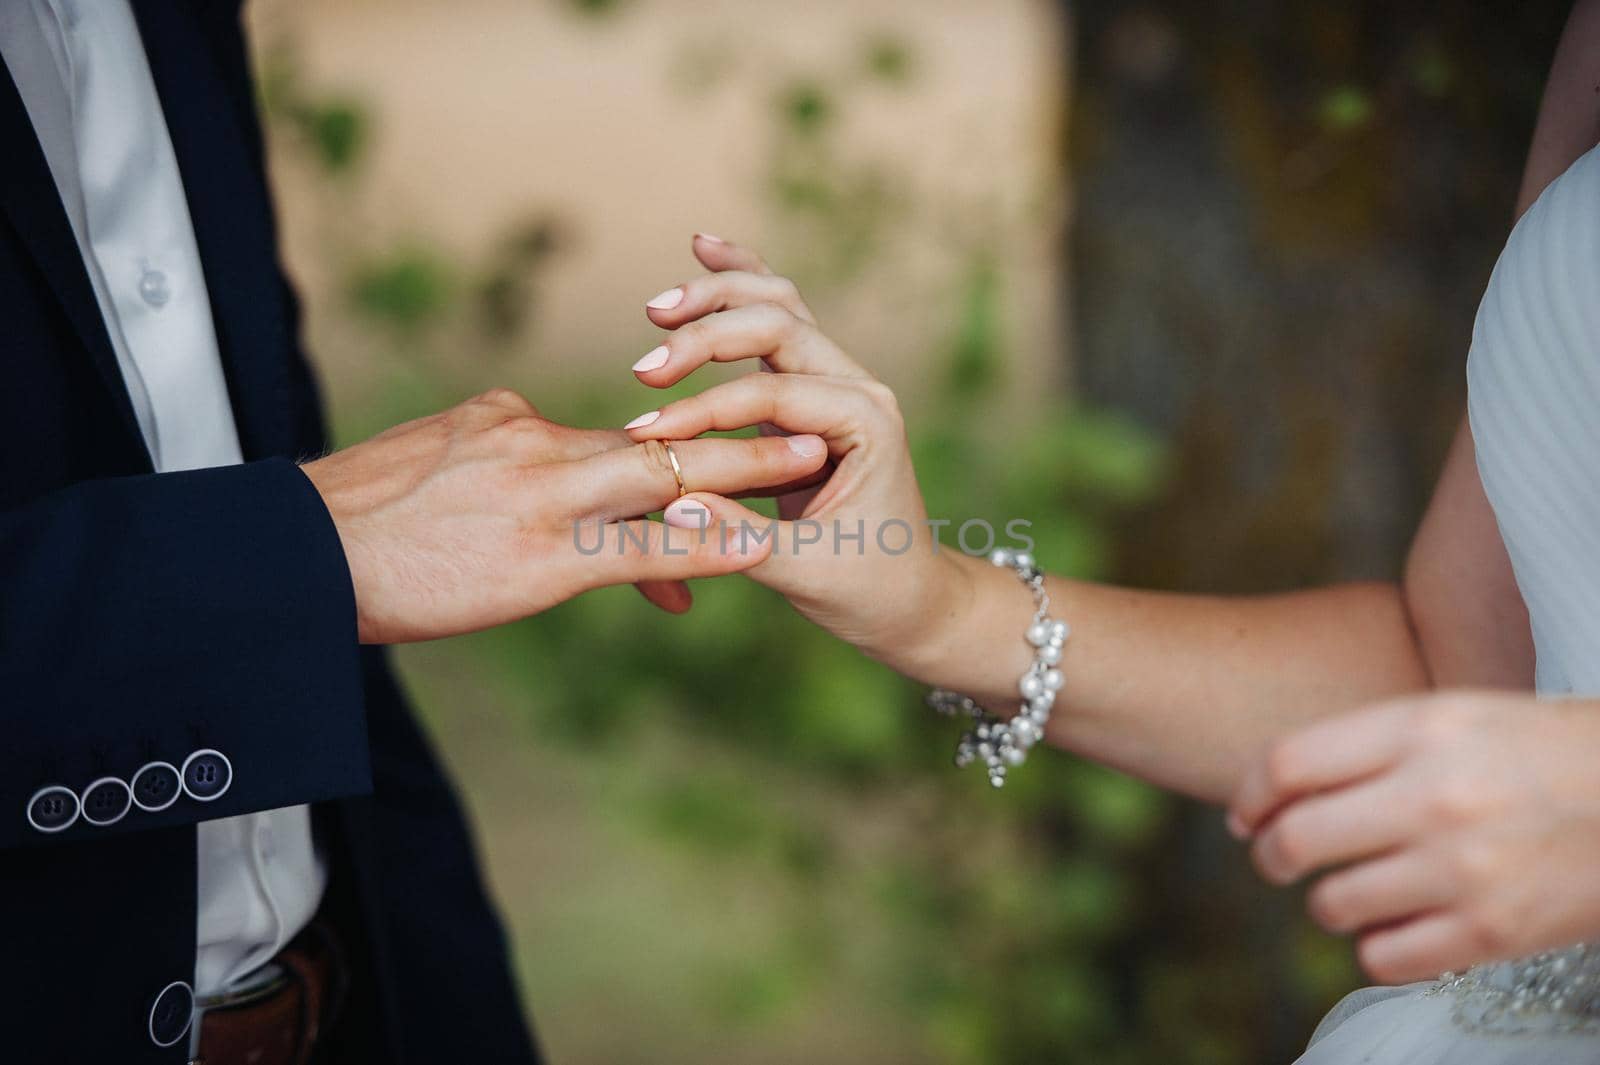 On the wedding day, the bride puts an engagement ring on the groom's finger.